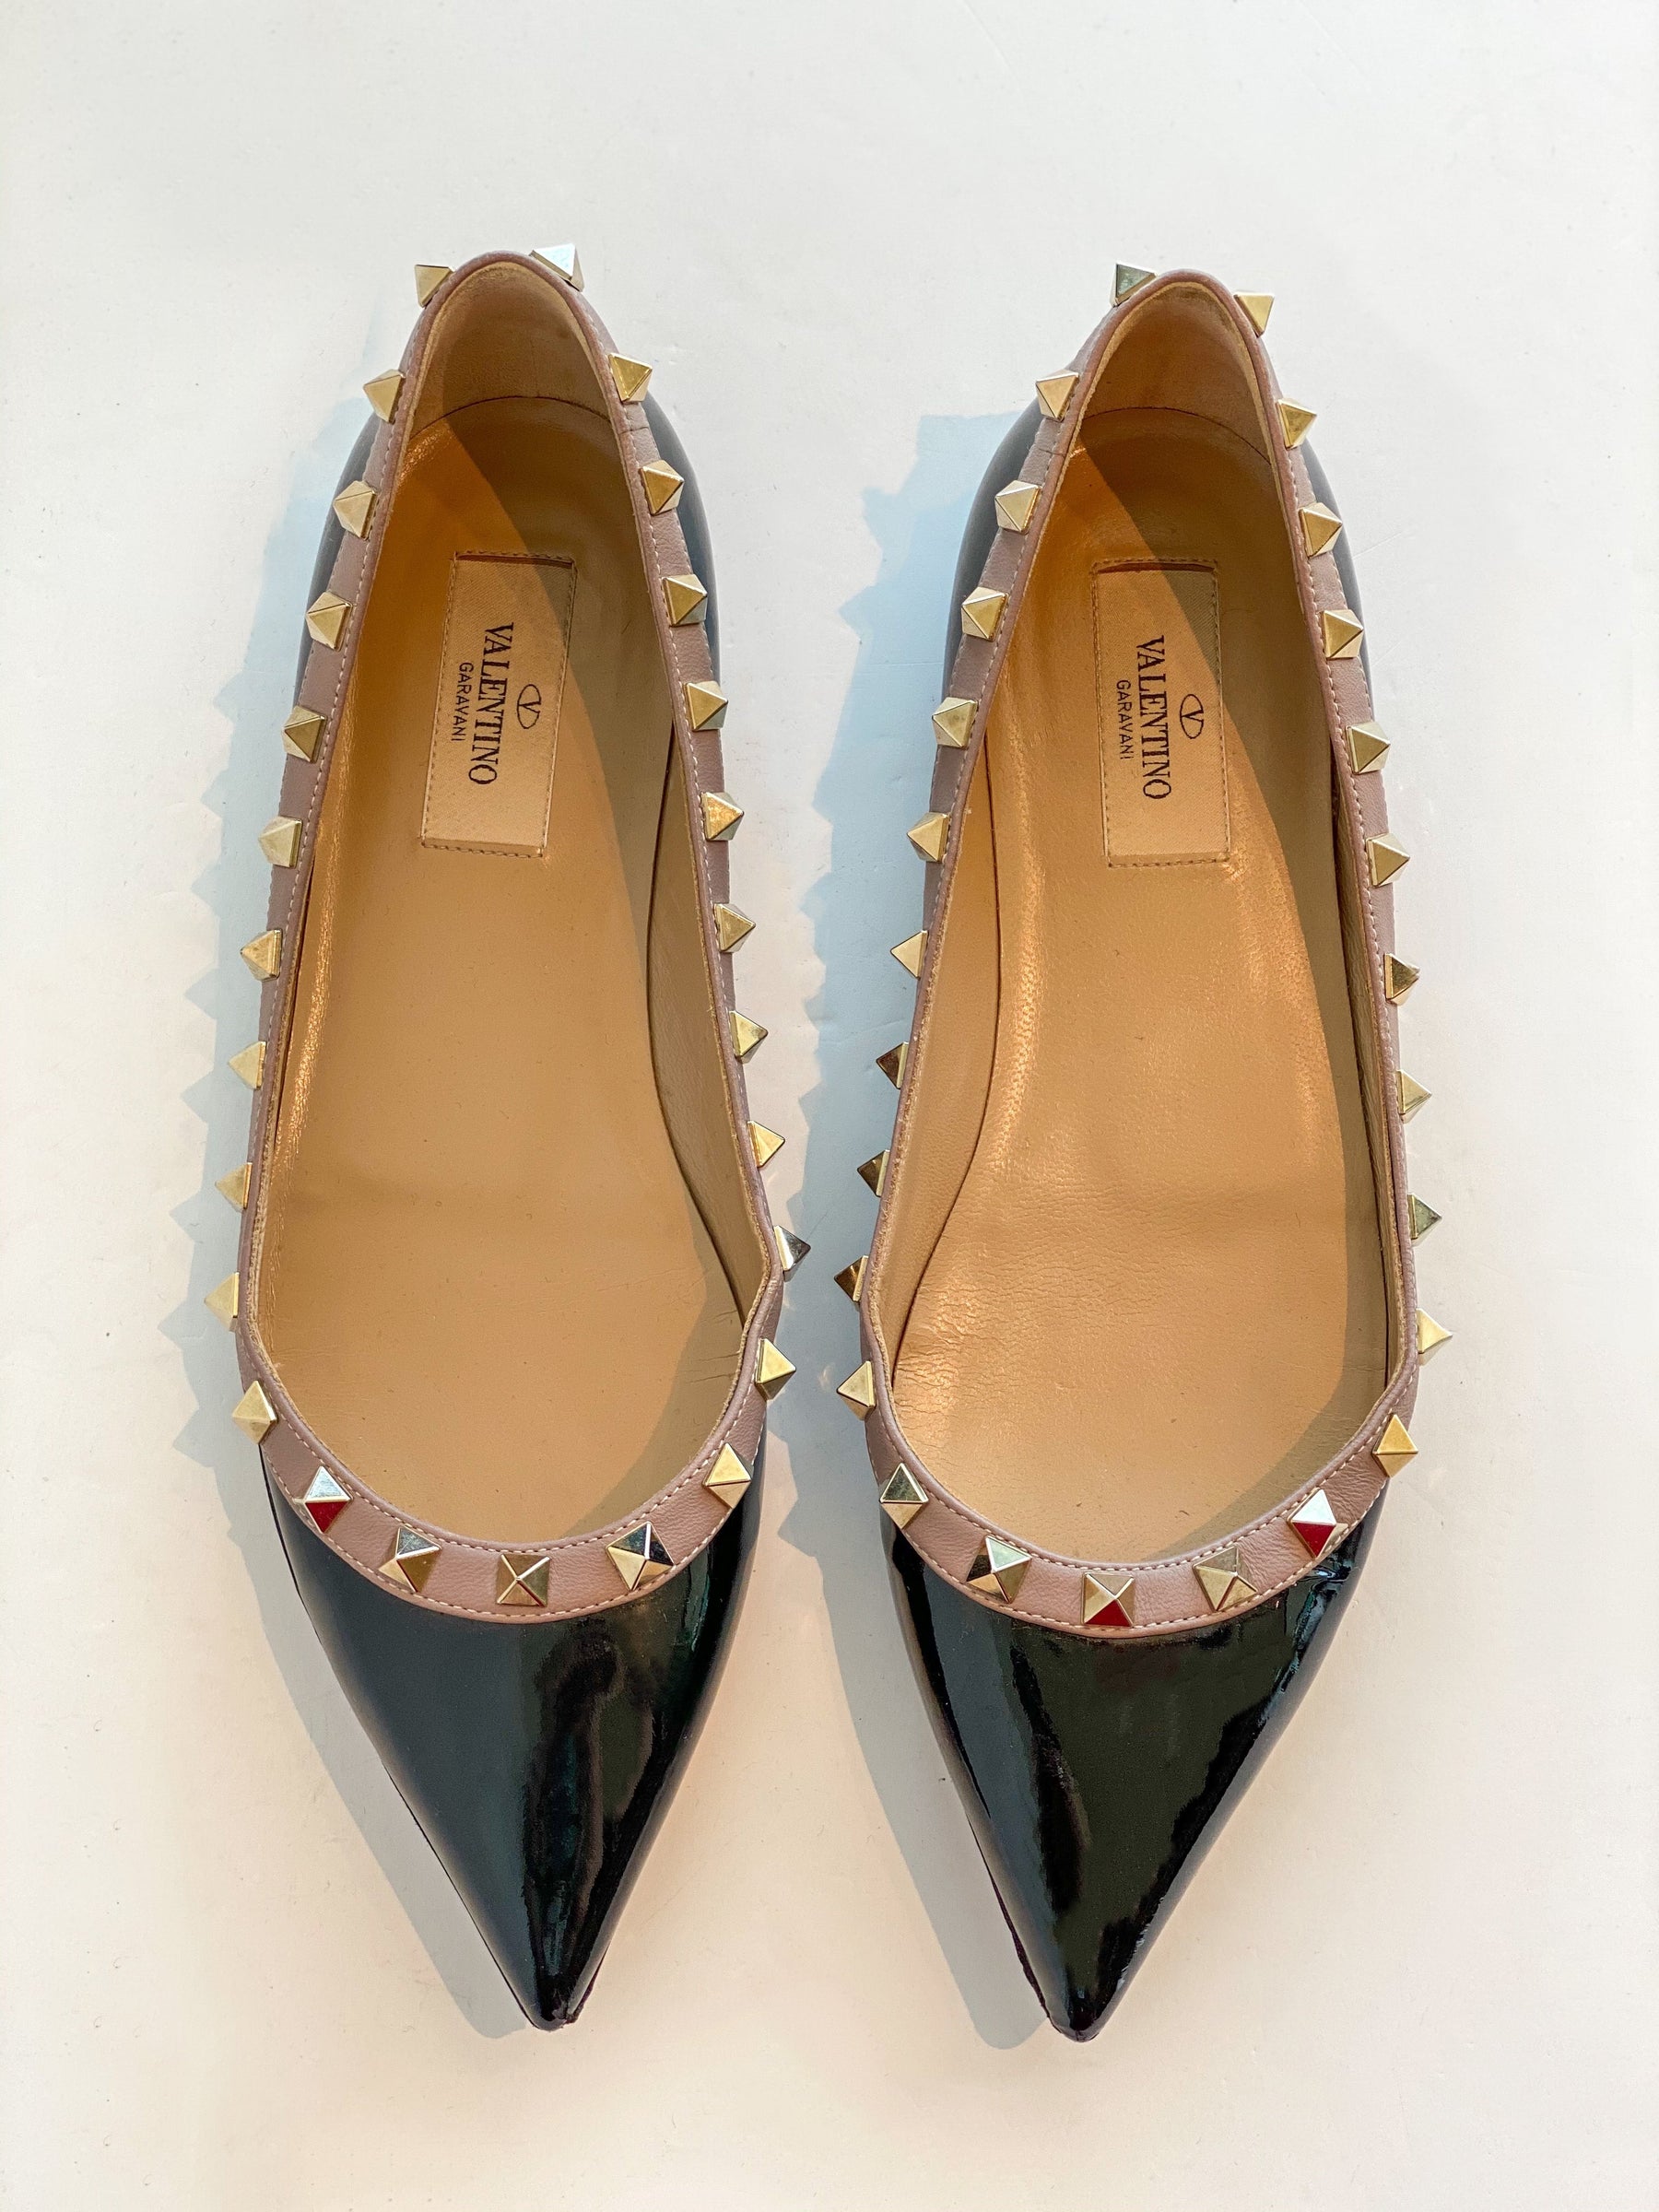 Valentino Rockstud Pointed Flats Top of Shoes